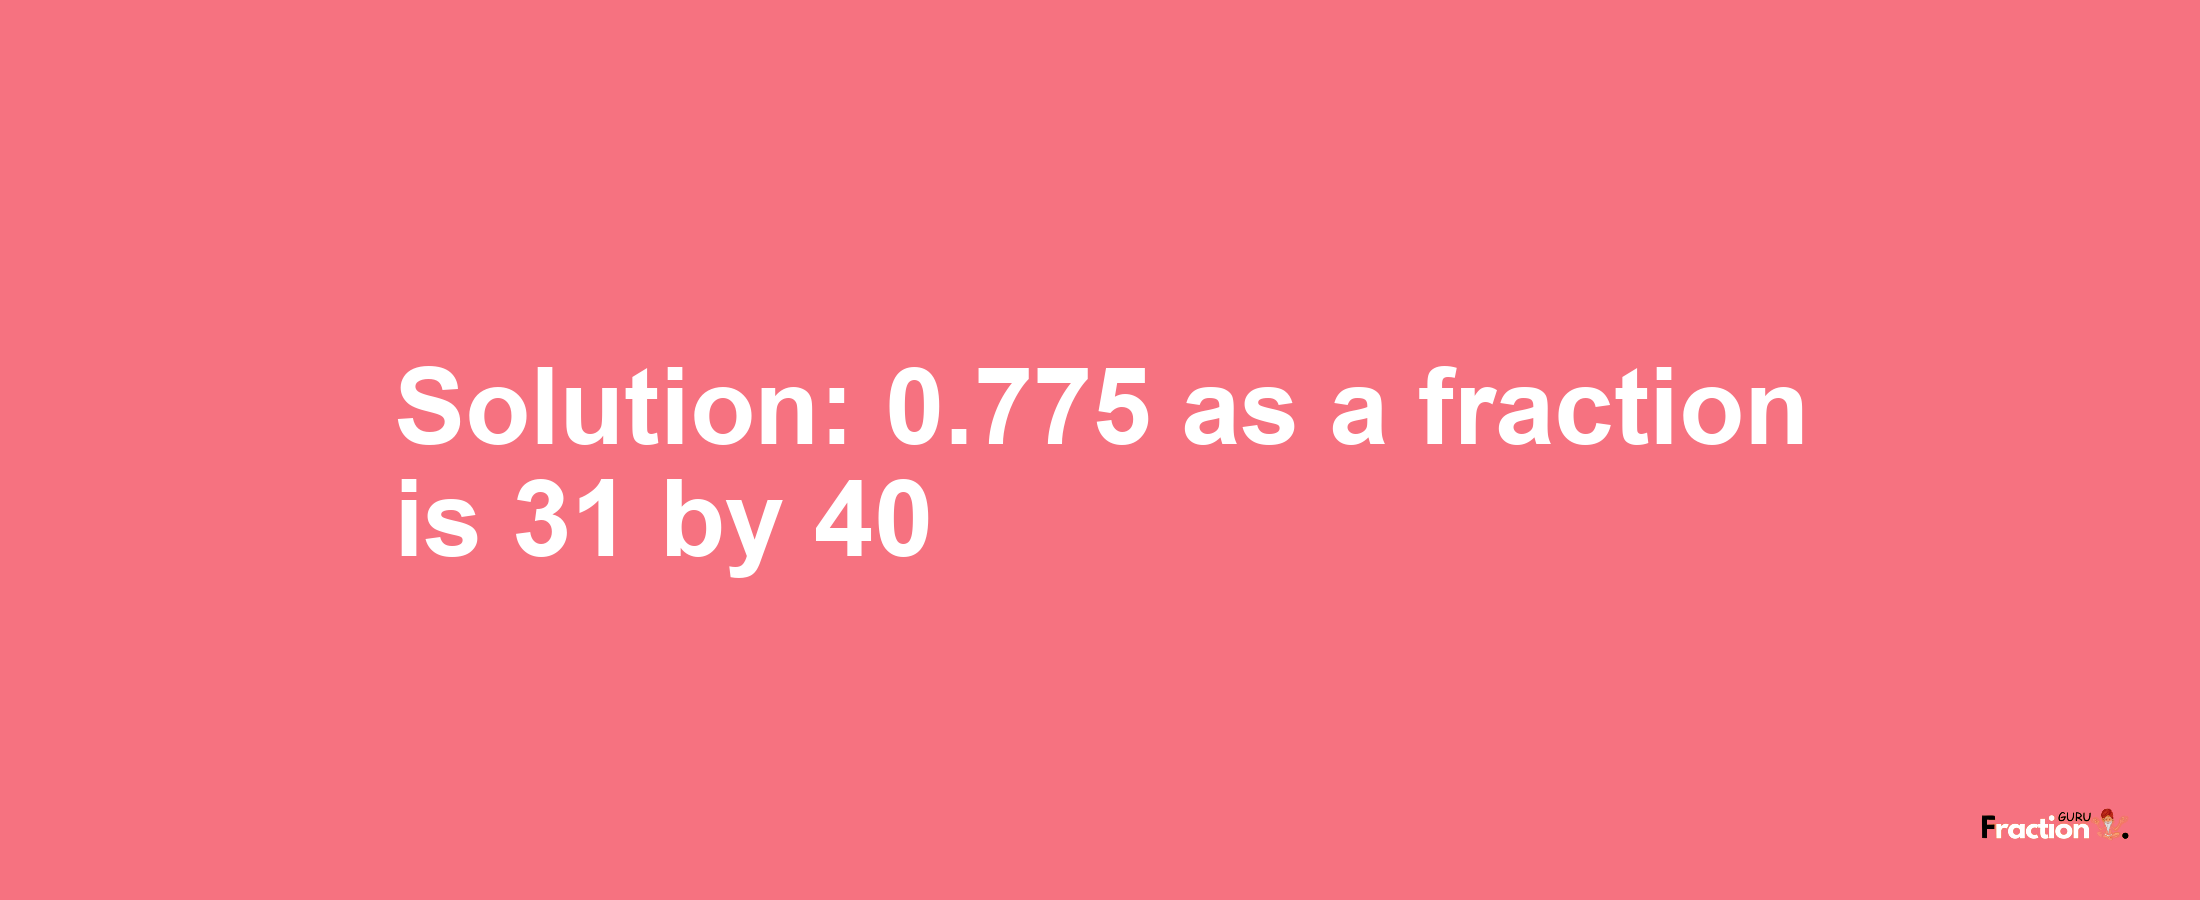 Solution:0.775 as a fraction is 31/40